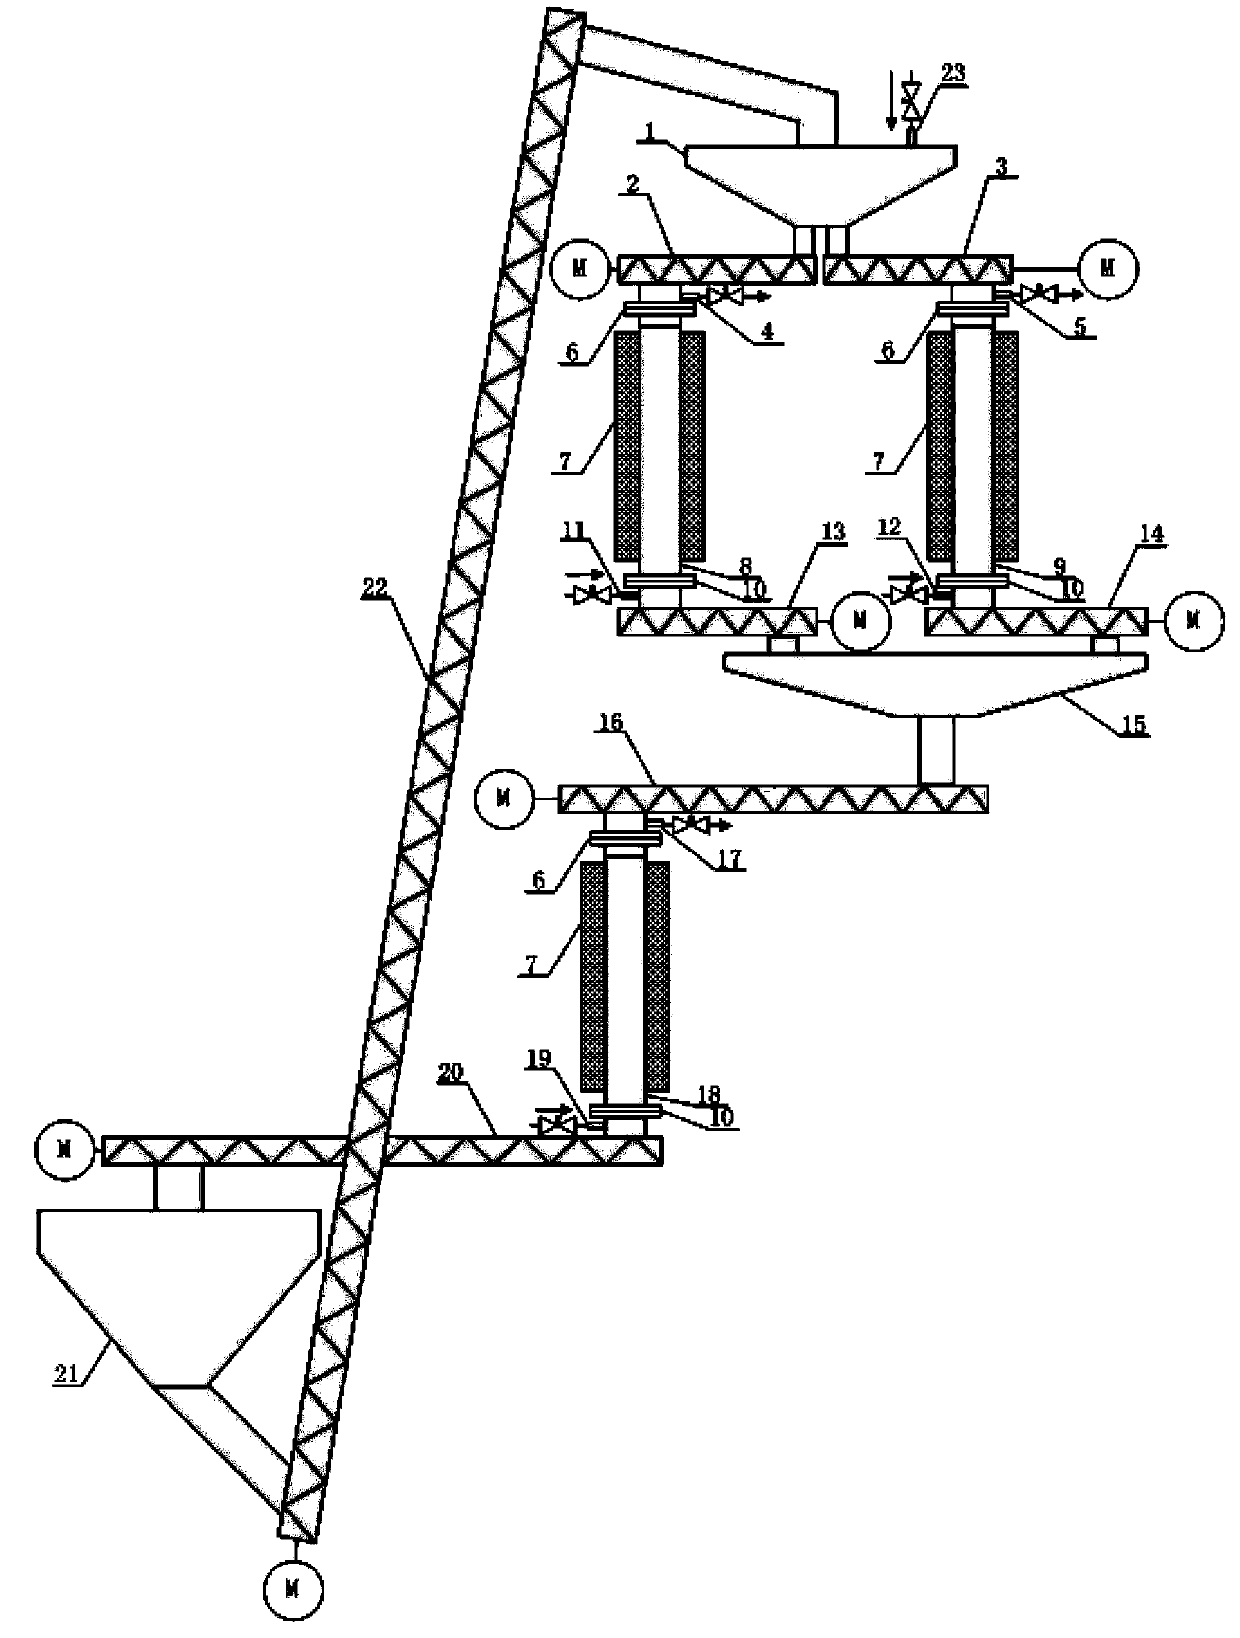 Continuously-running moving bed chemical-looping reaction system